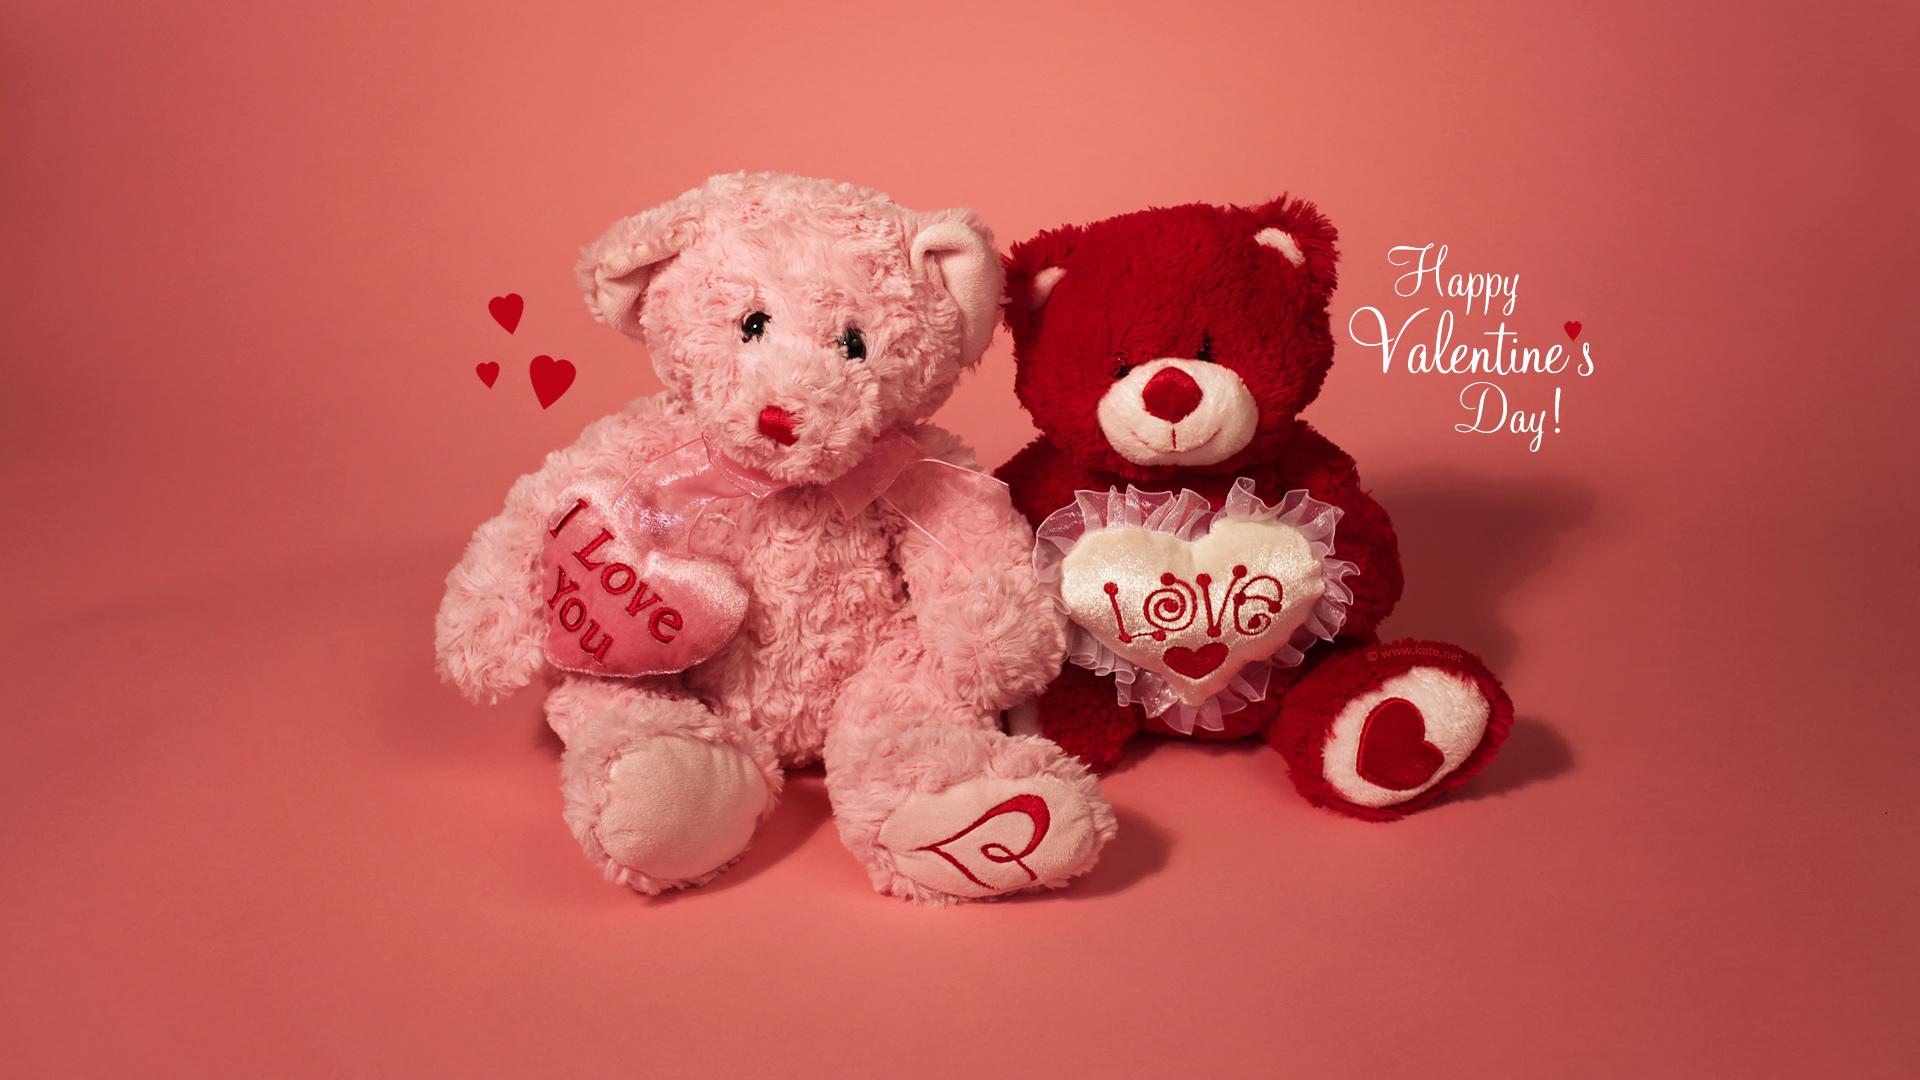 Valentine's Day Wallpapers, Desktop Backgrounds by Kate